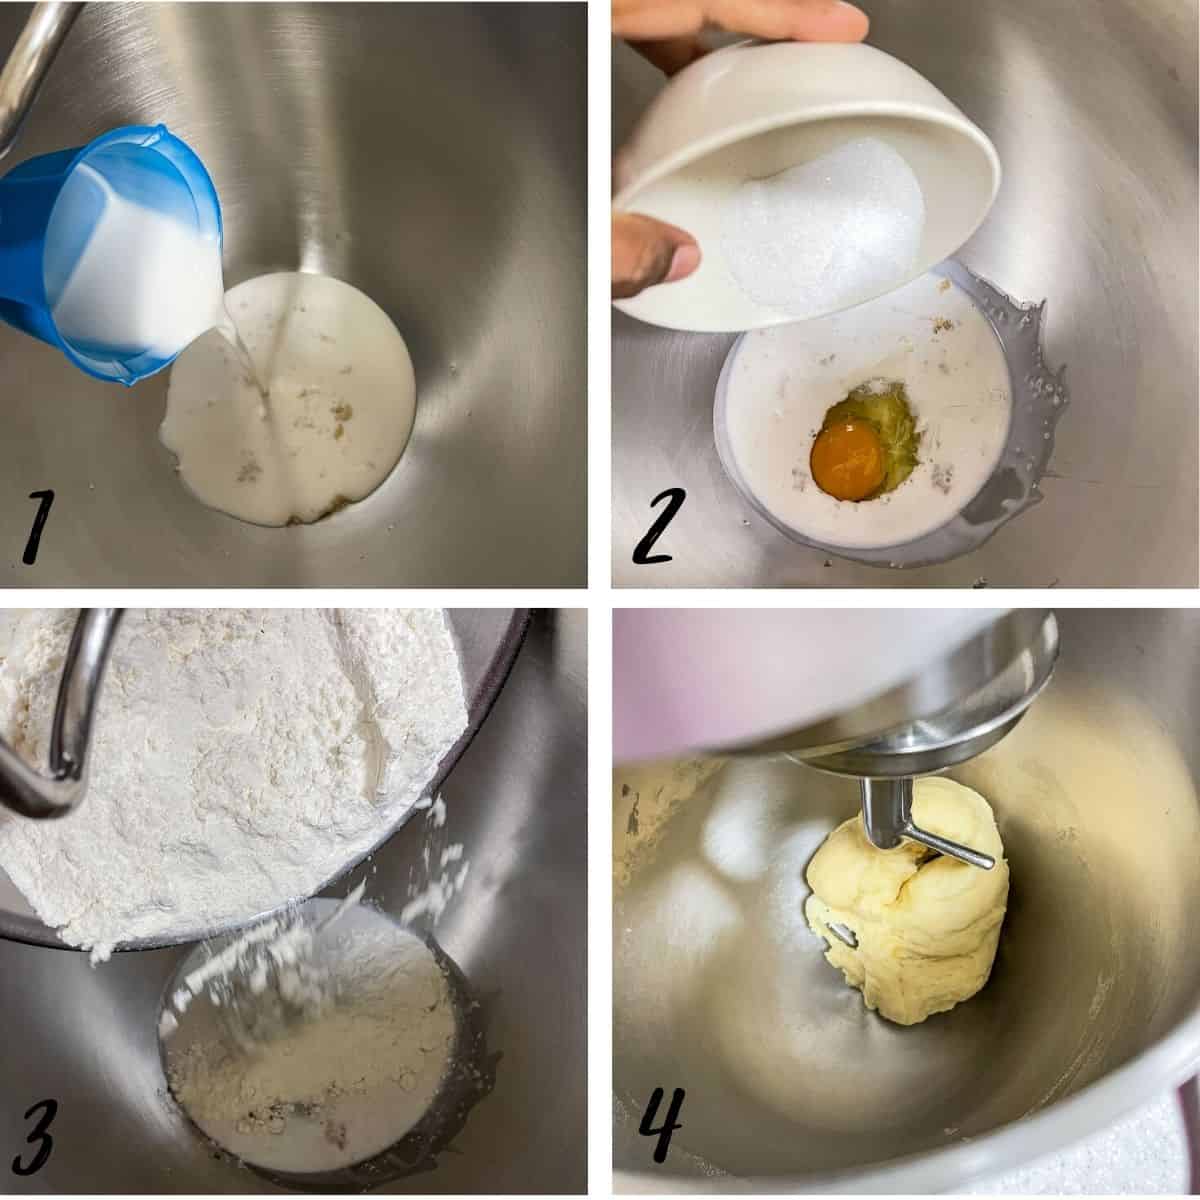 A poster of 4 images showing how to mix bread dough